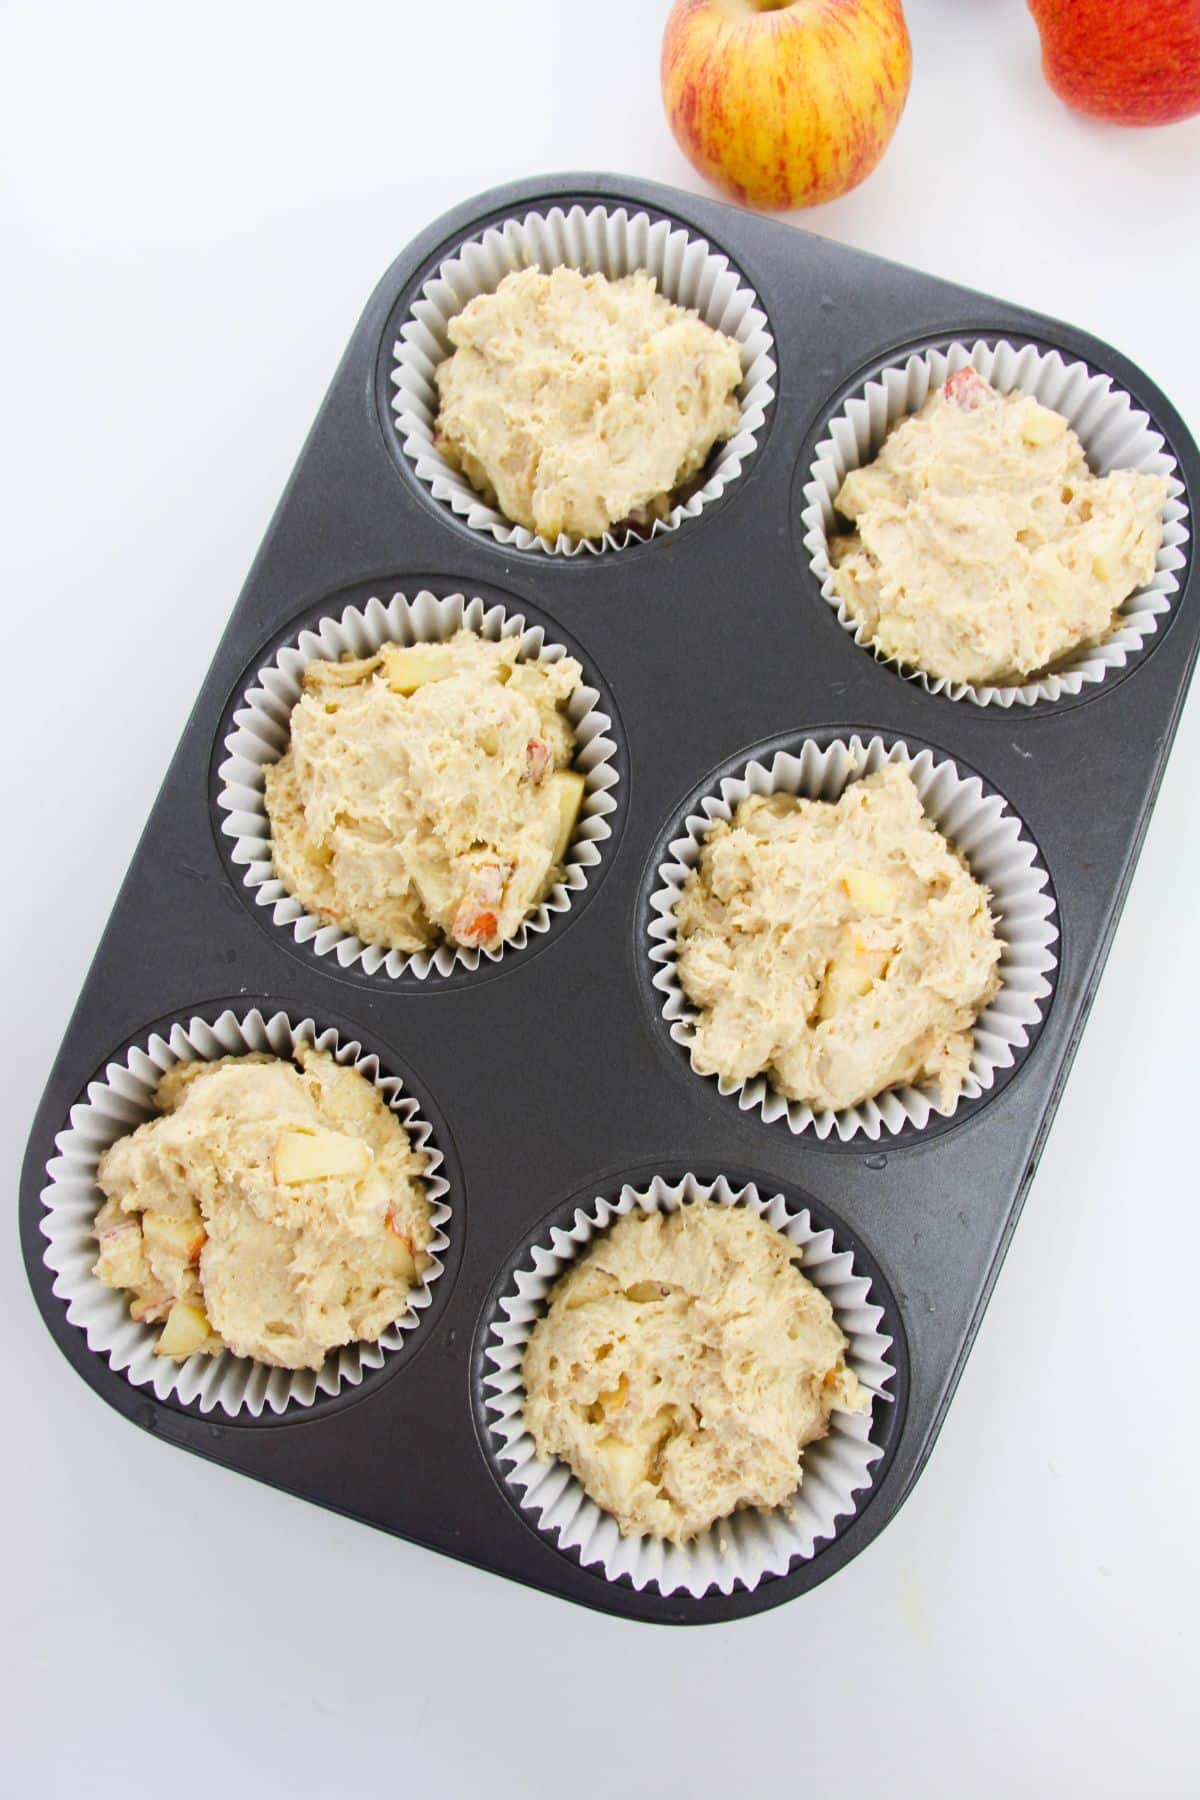 Muffin batter in a muffin tin with paper liners.